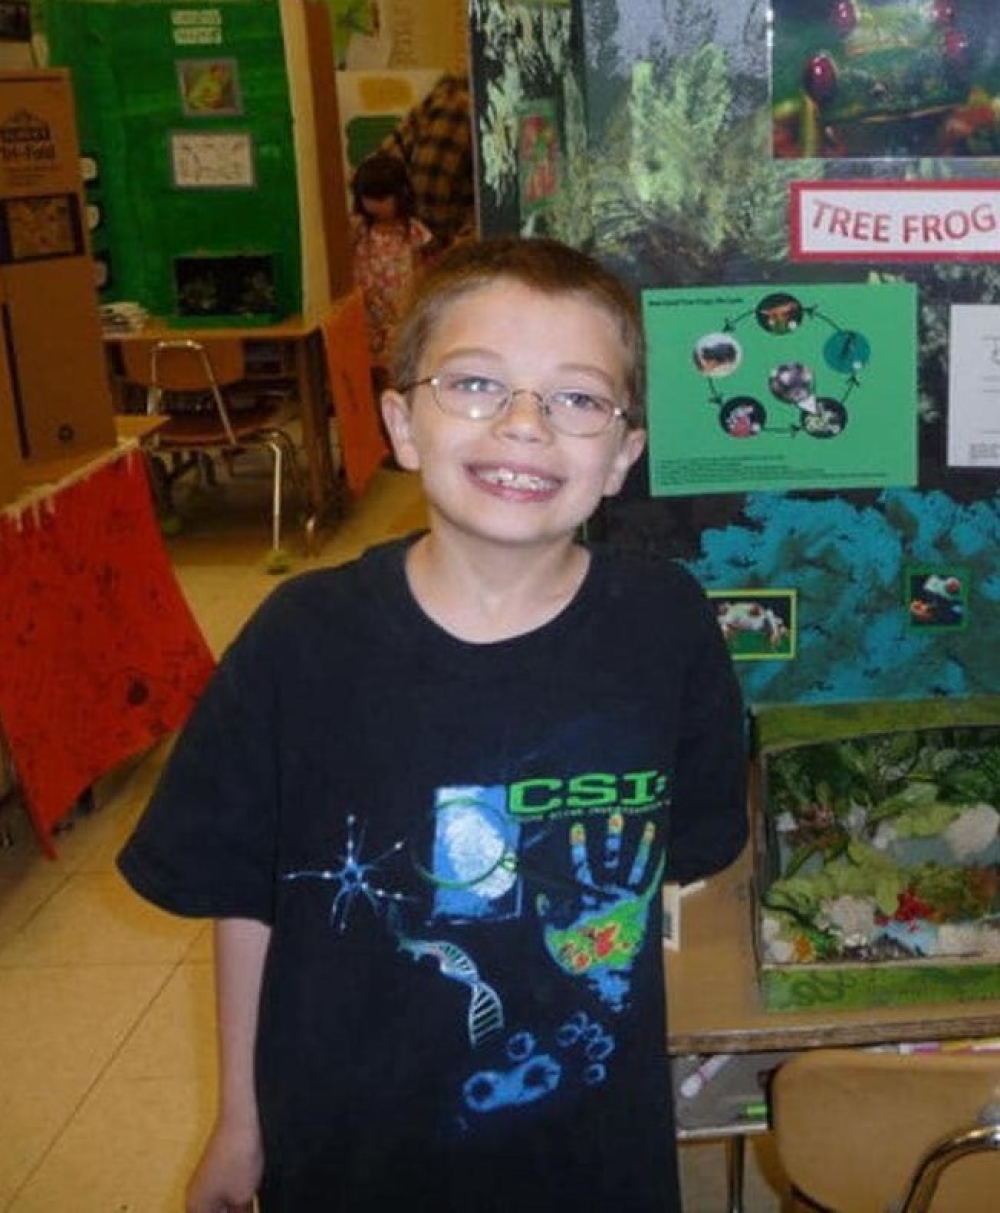 Kyron Horman age 7 at science fair the day he disappeared.